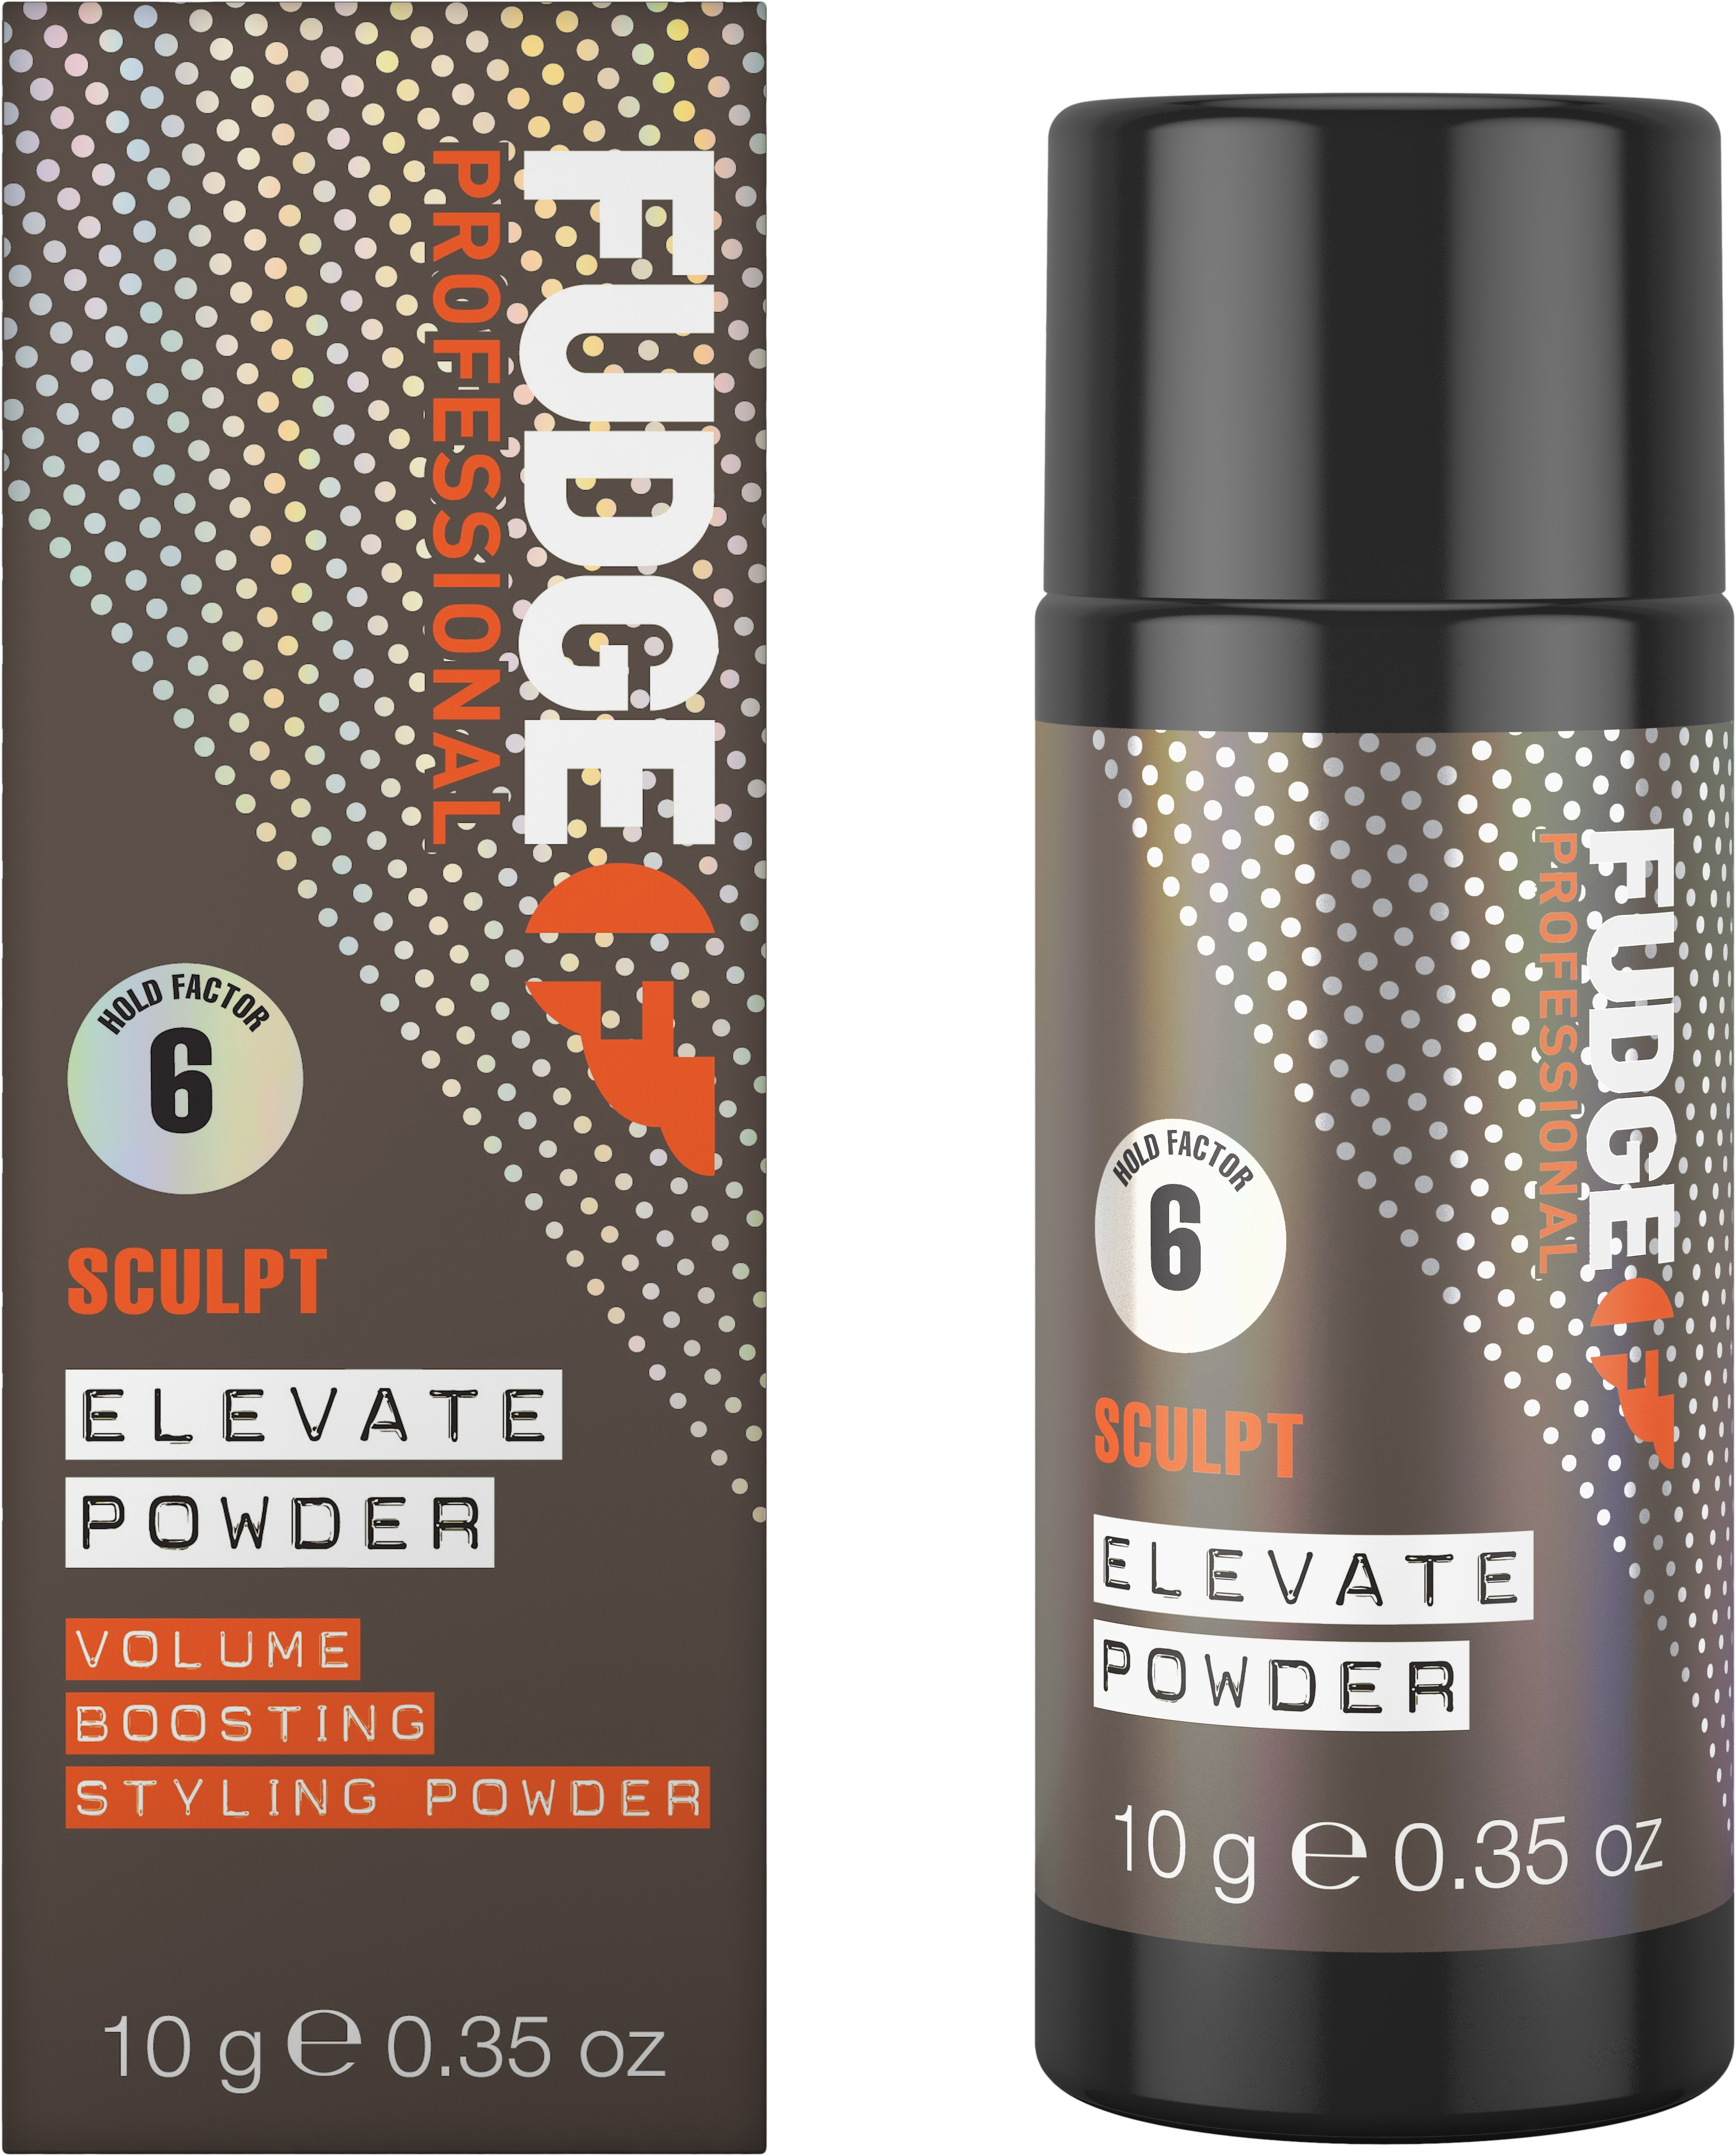 FUDGE ELEVATE POWDER 10g - Ultimate Hair and Beauty